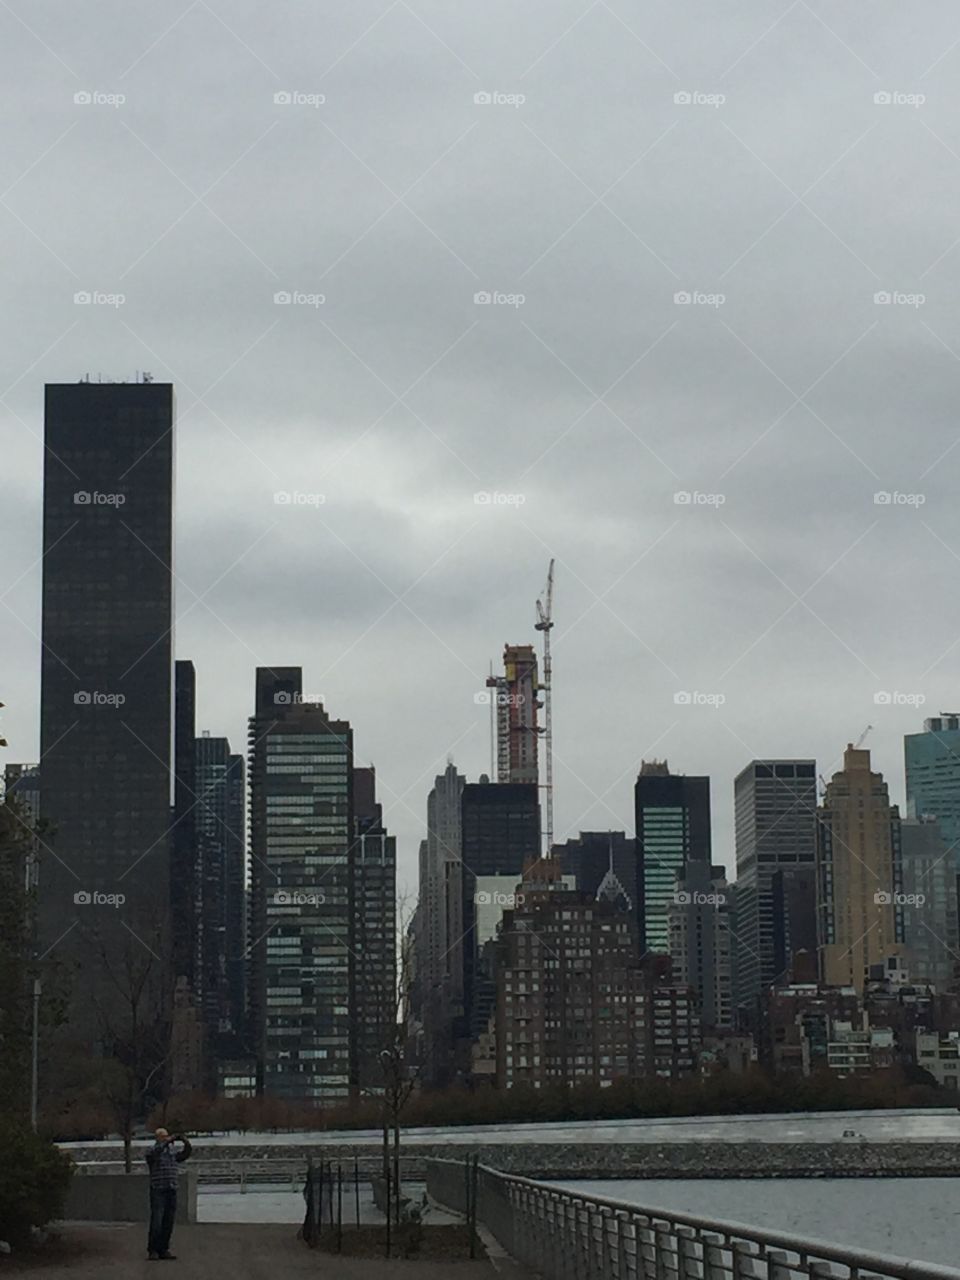 Photo of Manhattan's skyscrapers and winter sky. You can see the architecture and the river.